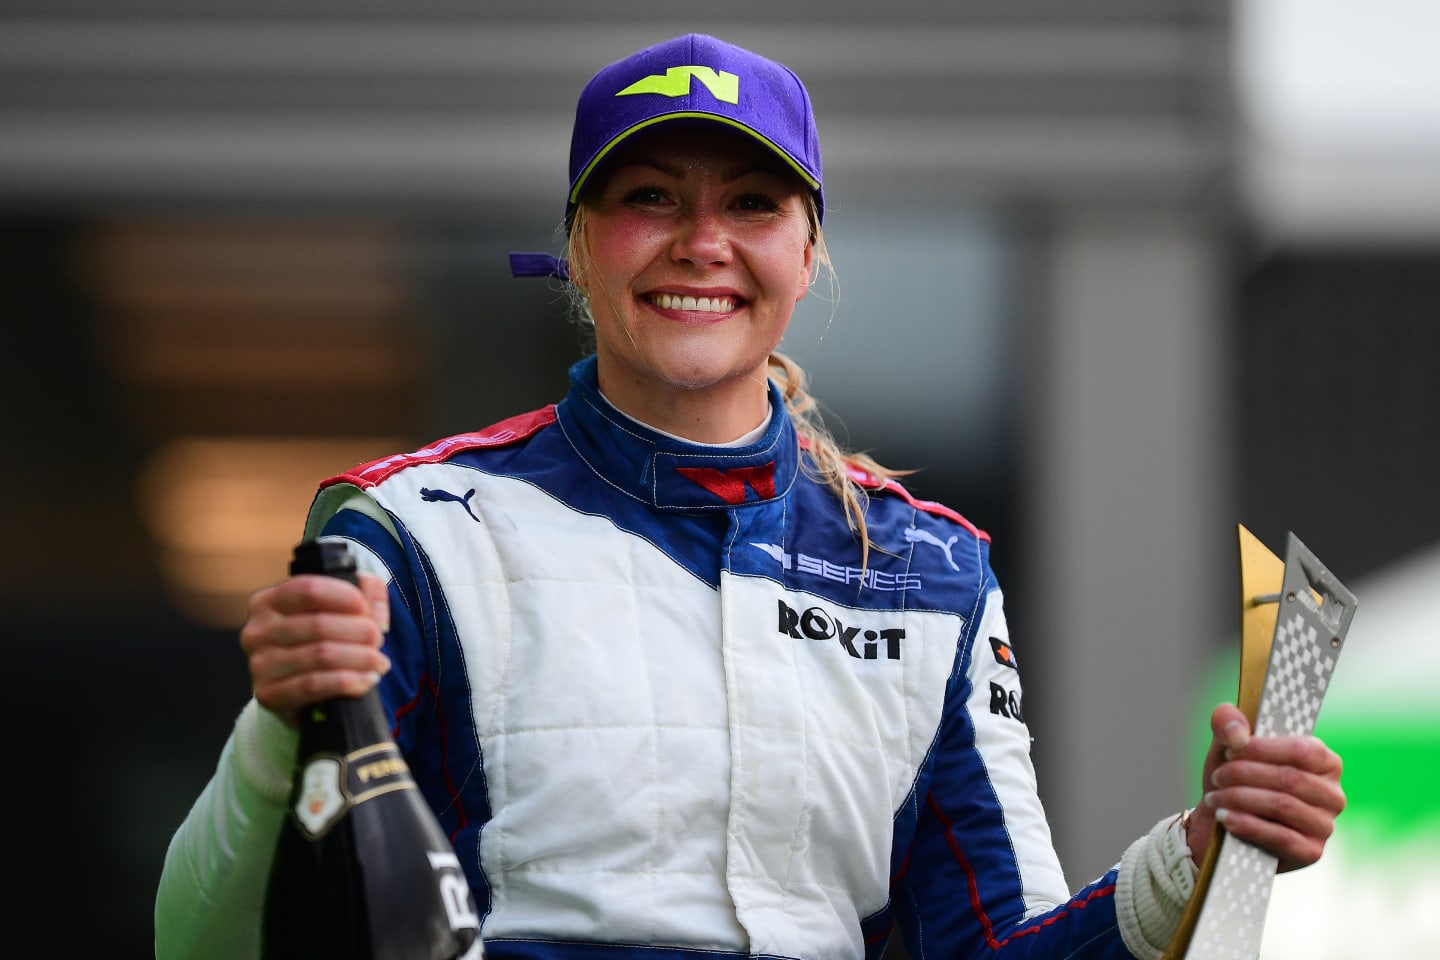 SPA, BELGIUM - AUGUST 28: Race winner Emma Kimilainen of Finland and Ecurie W (7) celebrates on the